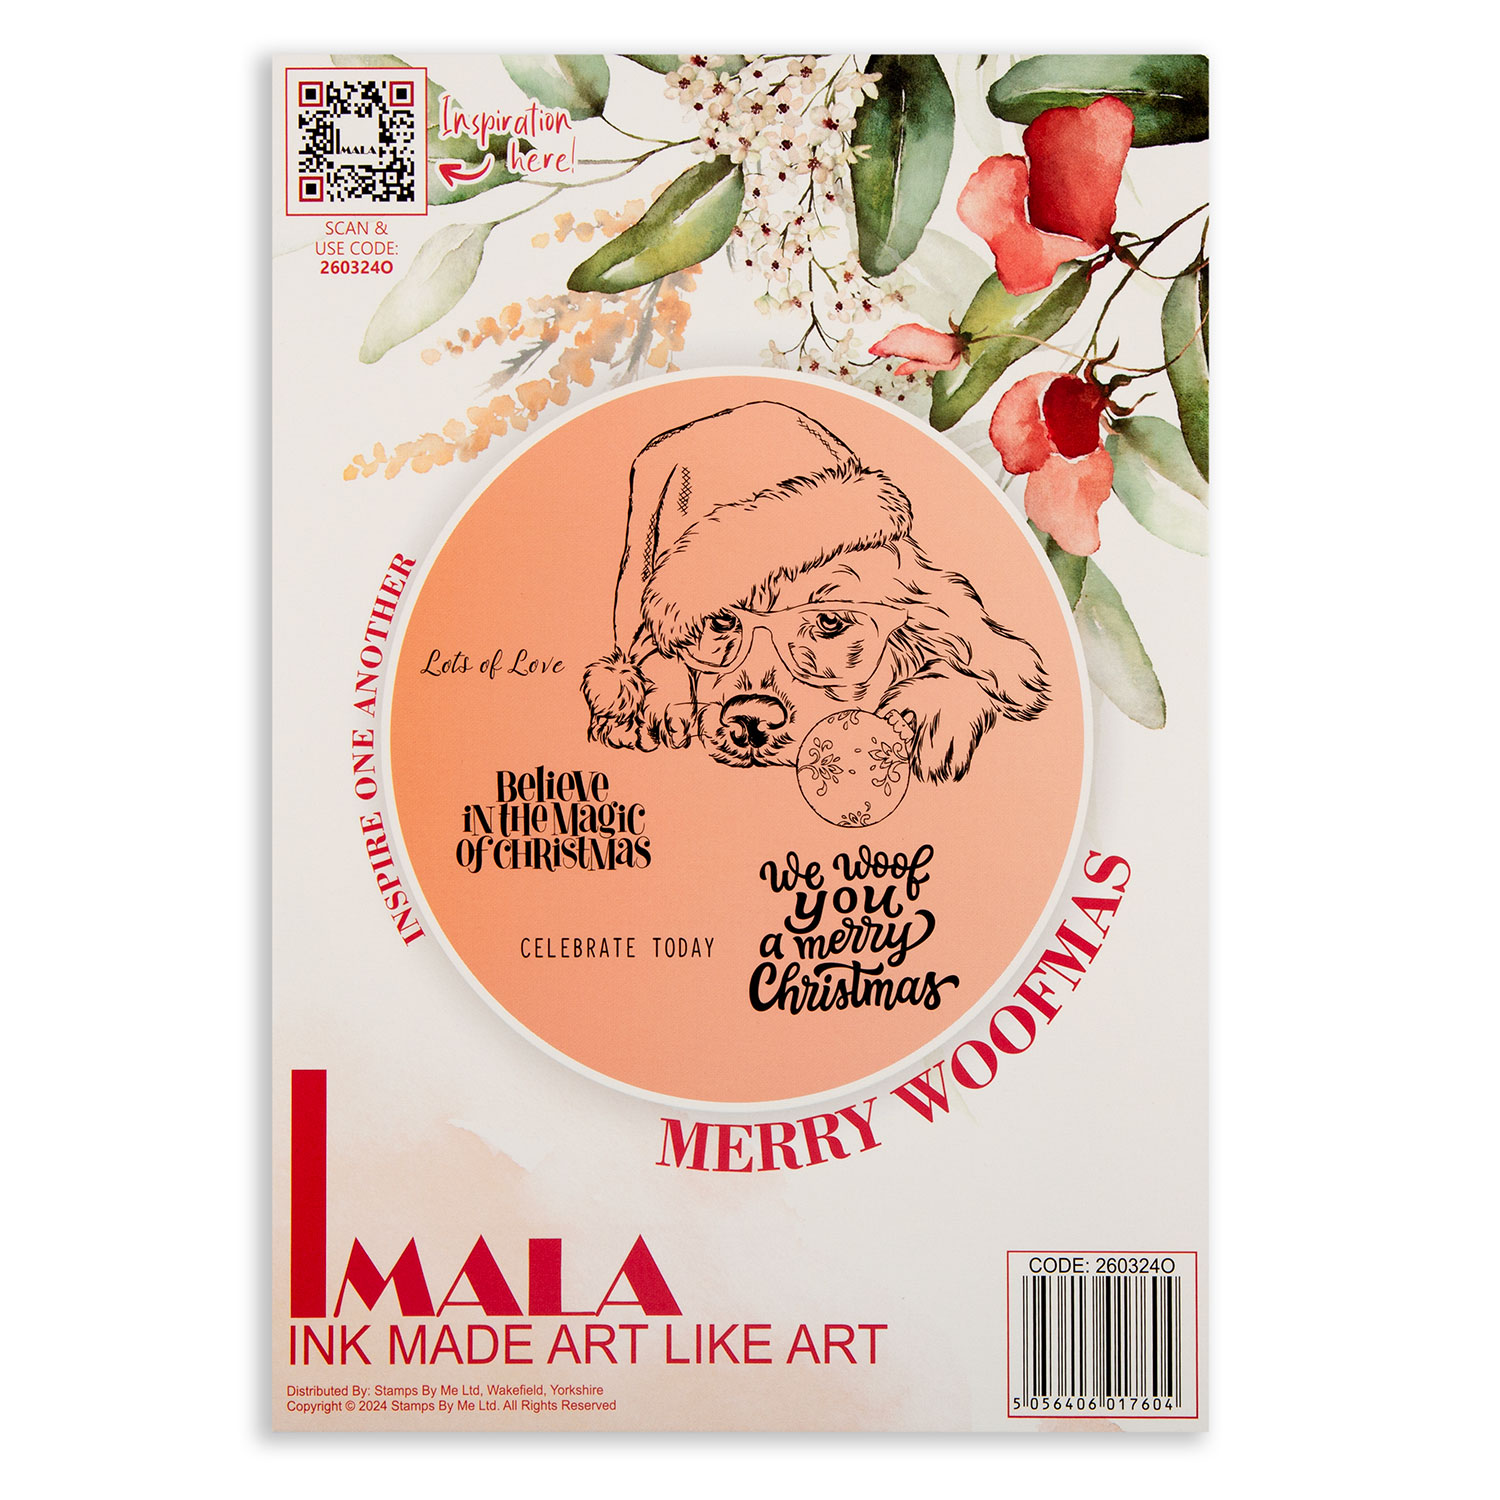 IMALA Chrismas Icons A5 Stamp Pick-n-Mix - Choose Any 3 - Merry Woofmas - 5 Stamps